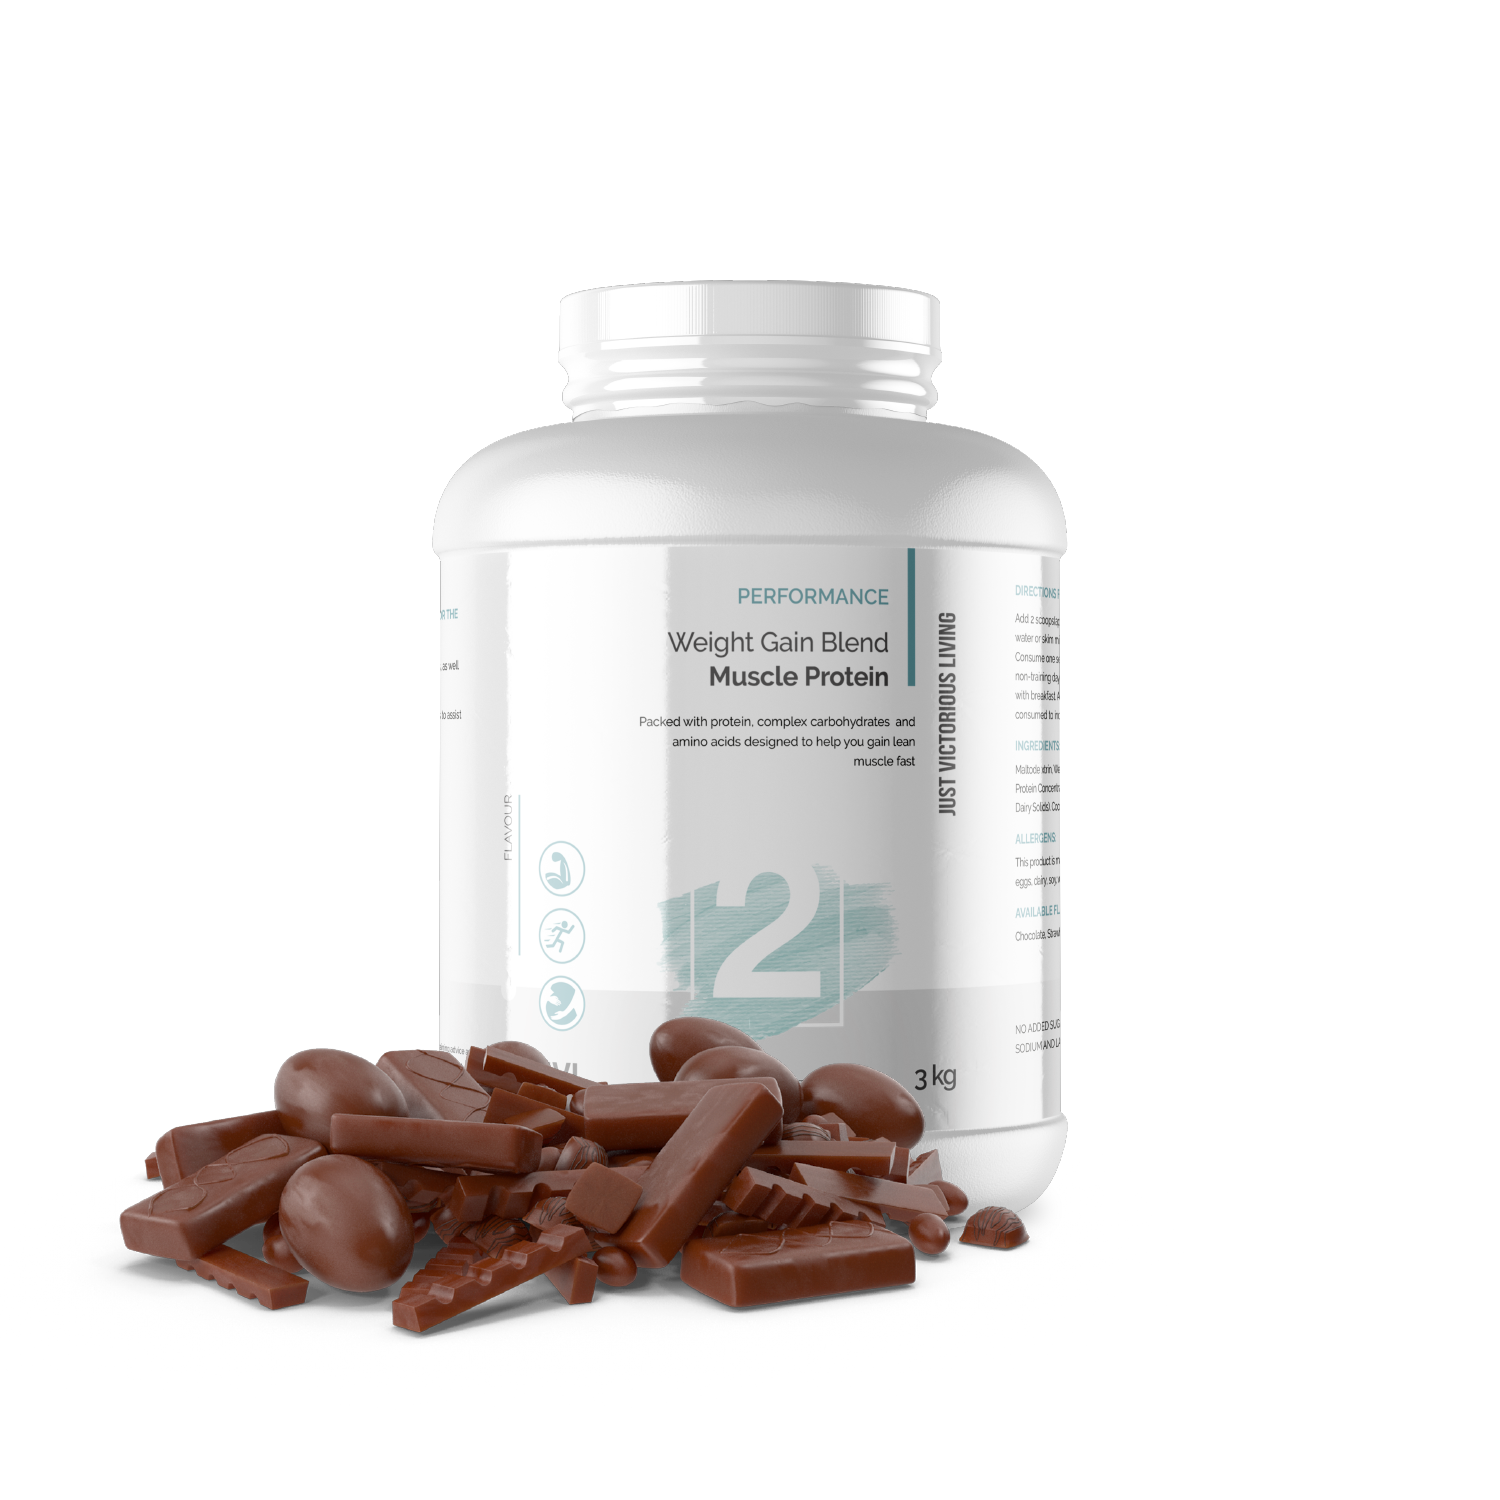 Weight Gain Muscle Protein - JVL 